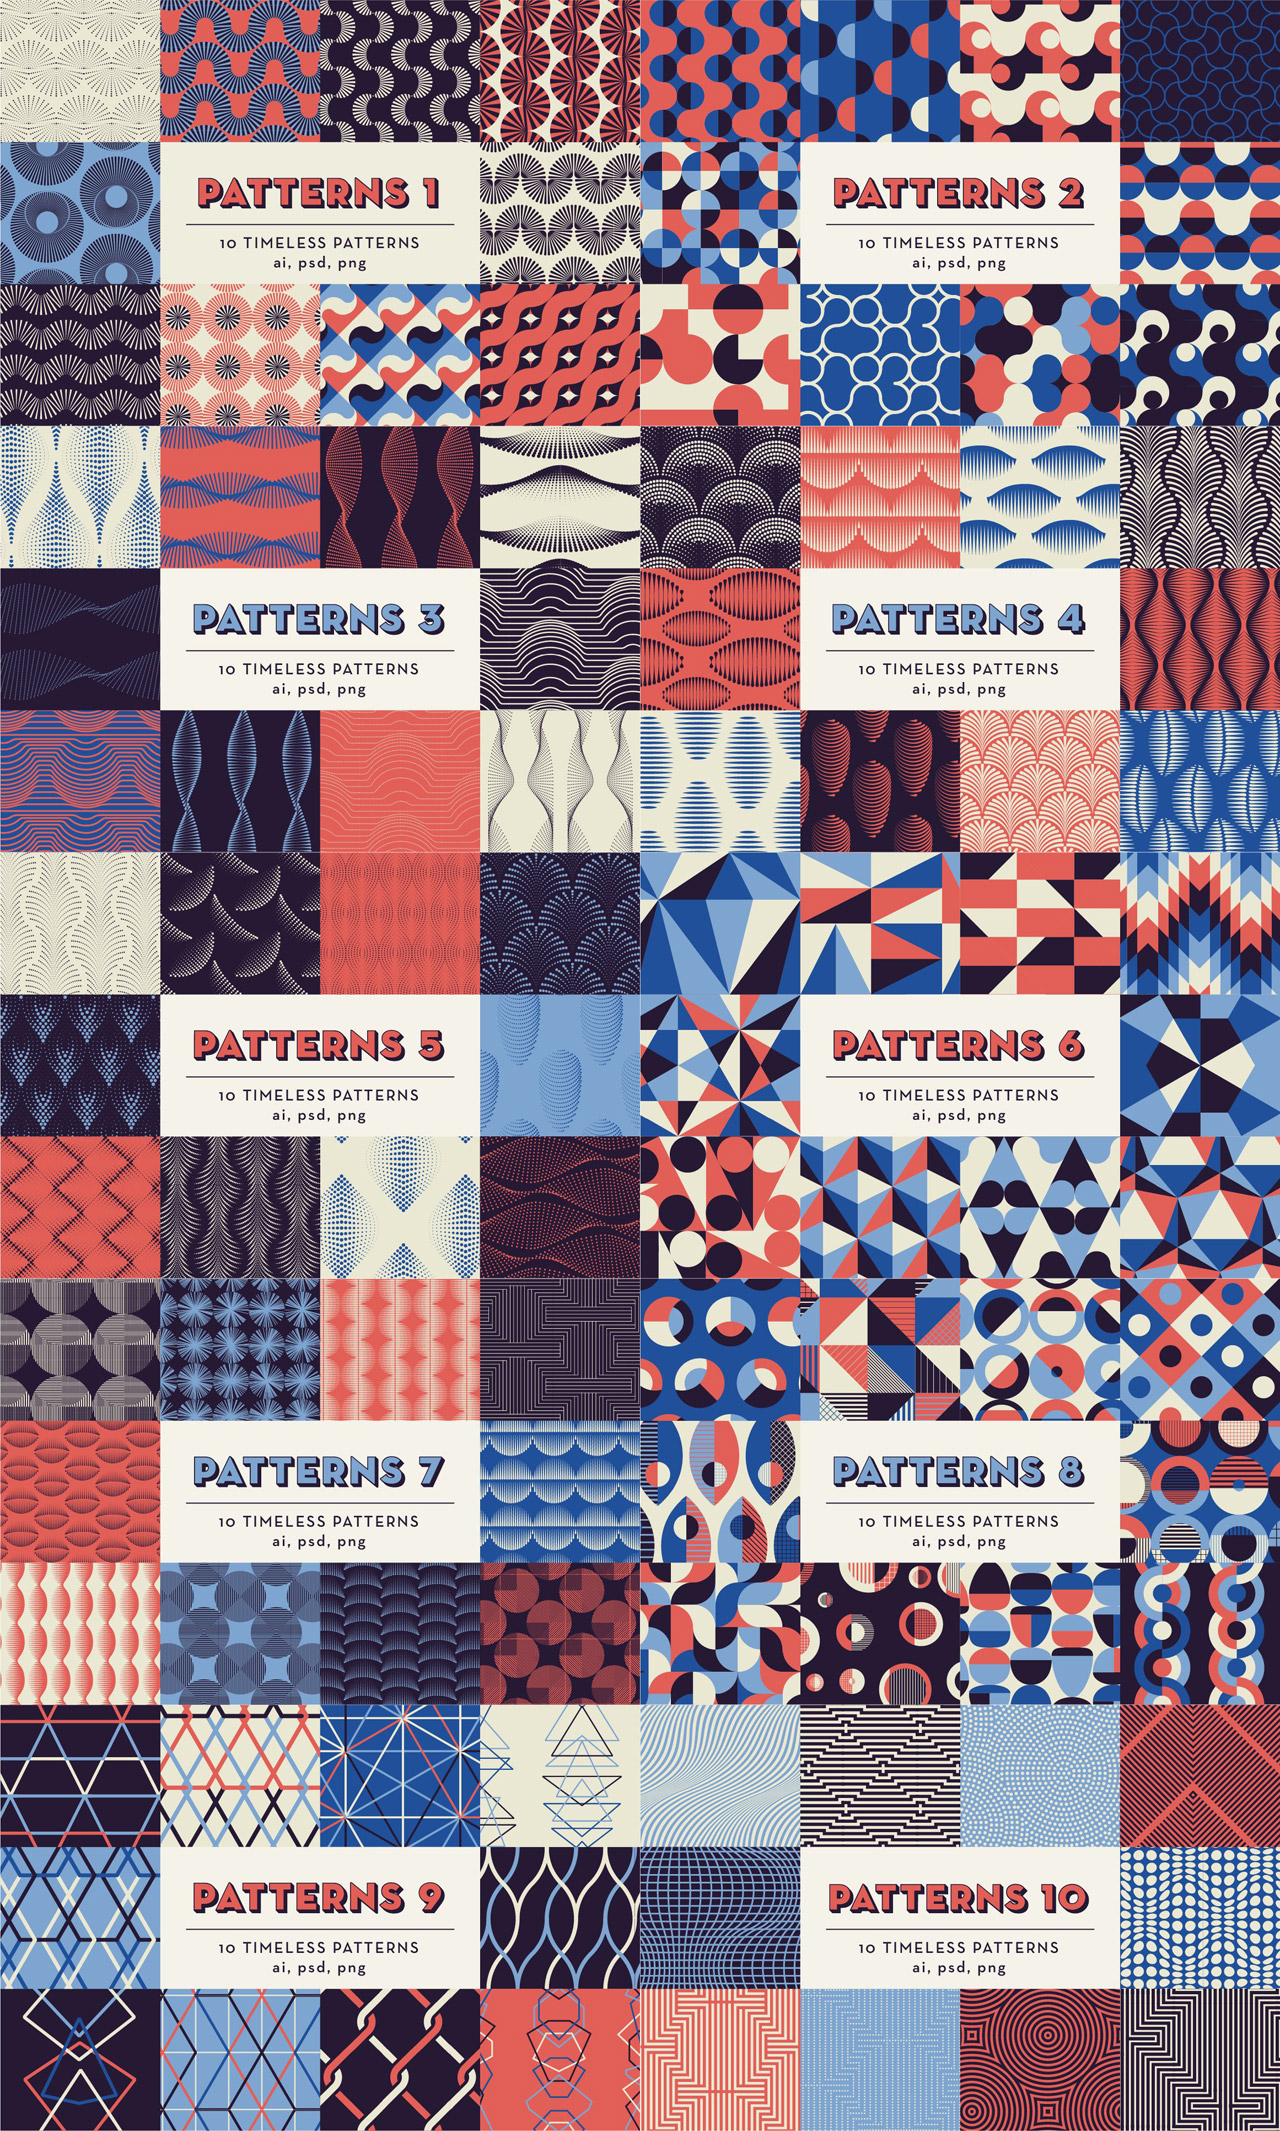 Geometric Patterns Bundle: 100 seamless patterns for any kind of graphic design projects.